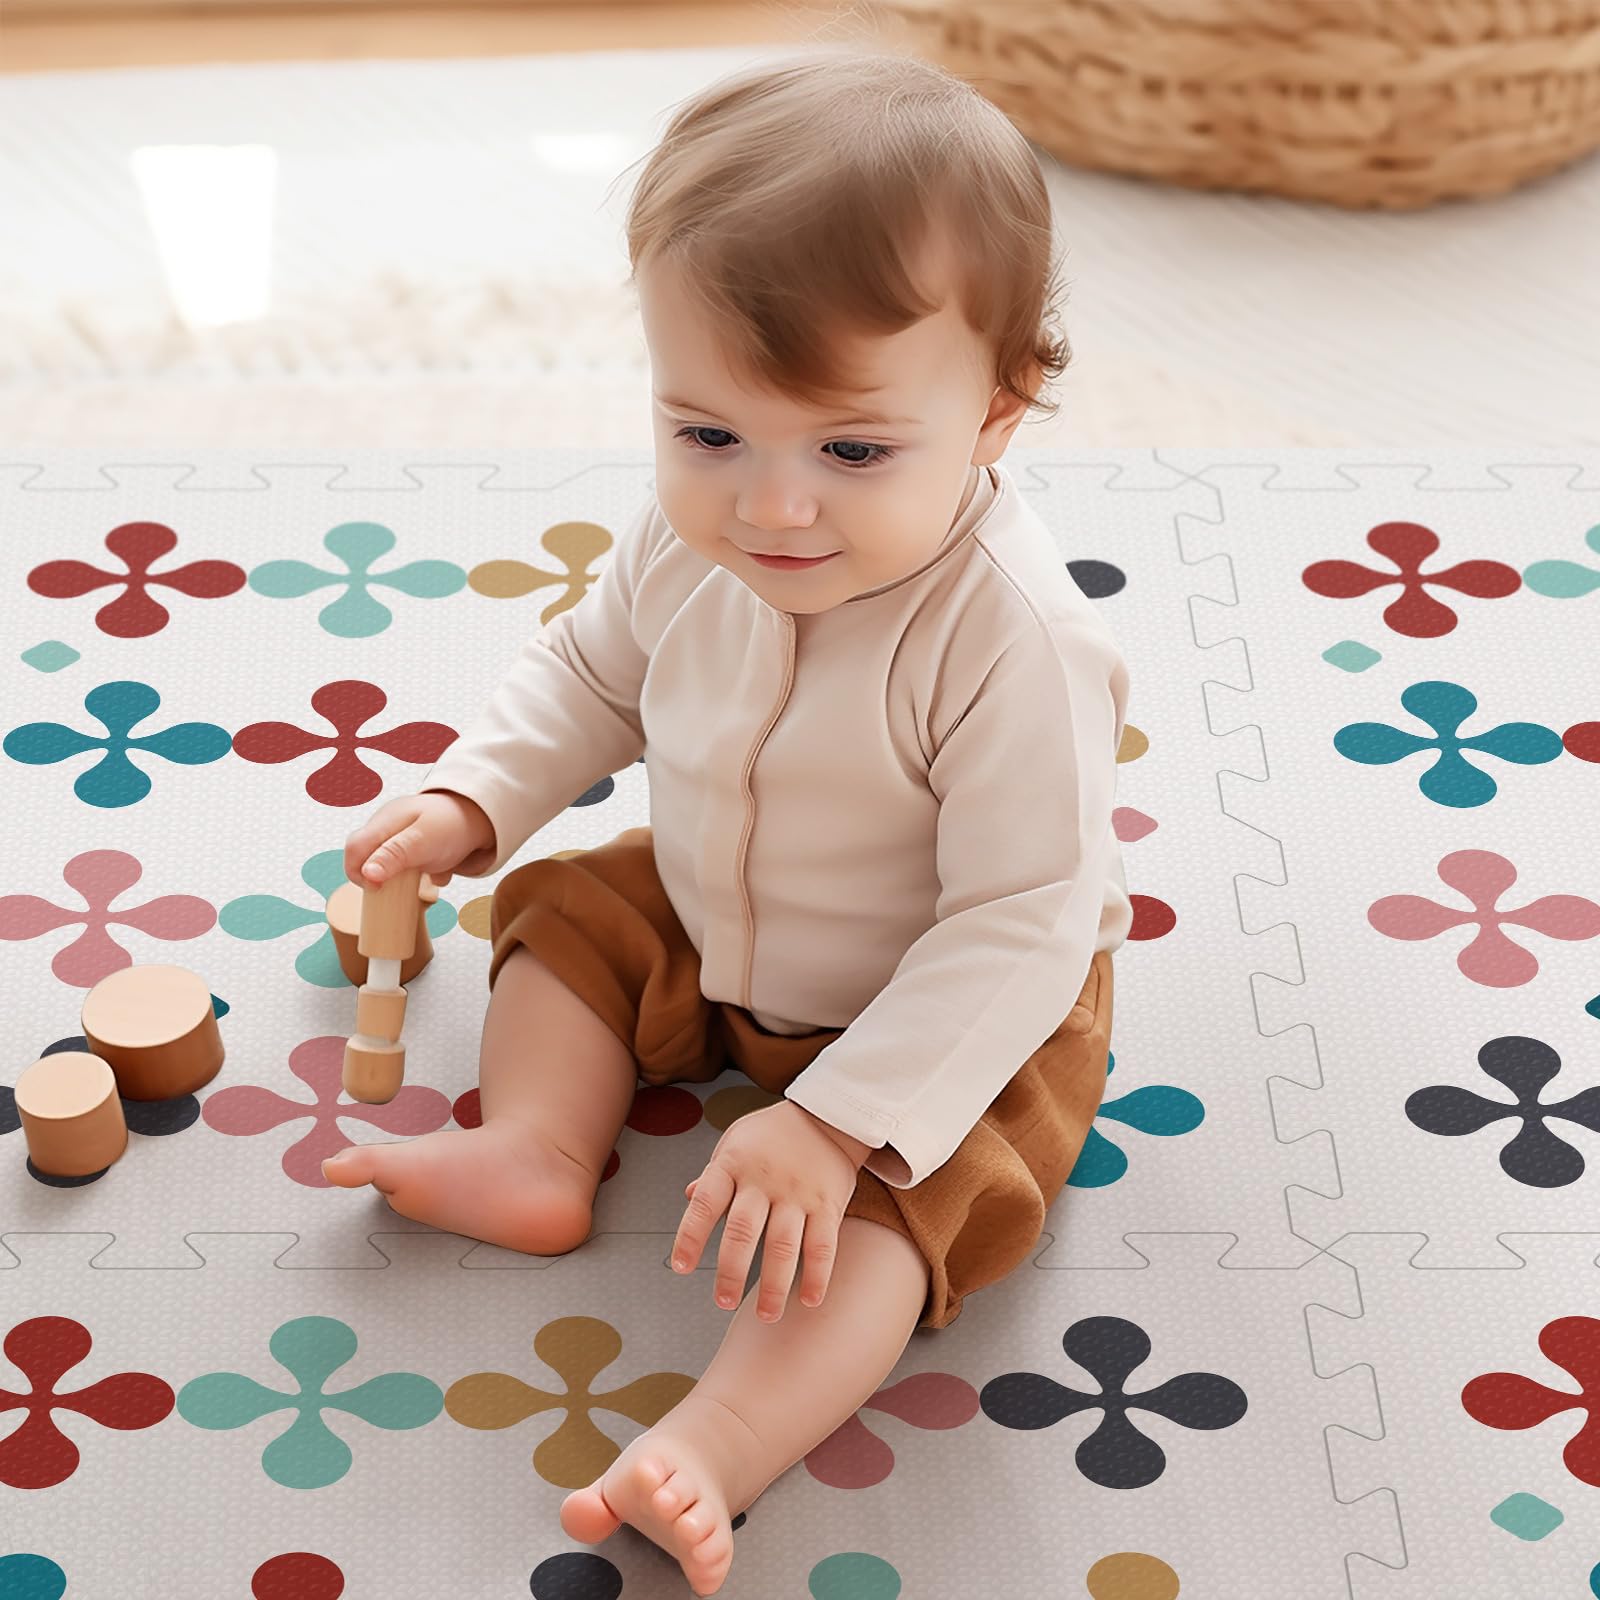 PIGLOG Baby Play Mat - Foam Floor Tiles Interlocking Foam Play Mat 72x48 Inches Soft Non Toxic Puzzle Mat for Infants and Toddlers Tummy Time Mat Crawling Mat (Blossom)